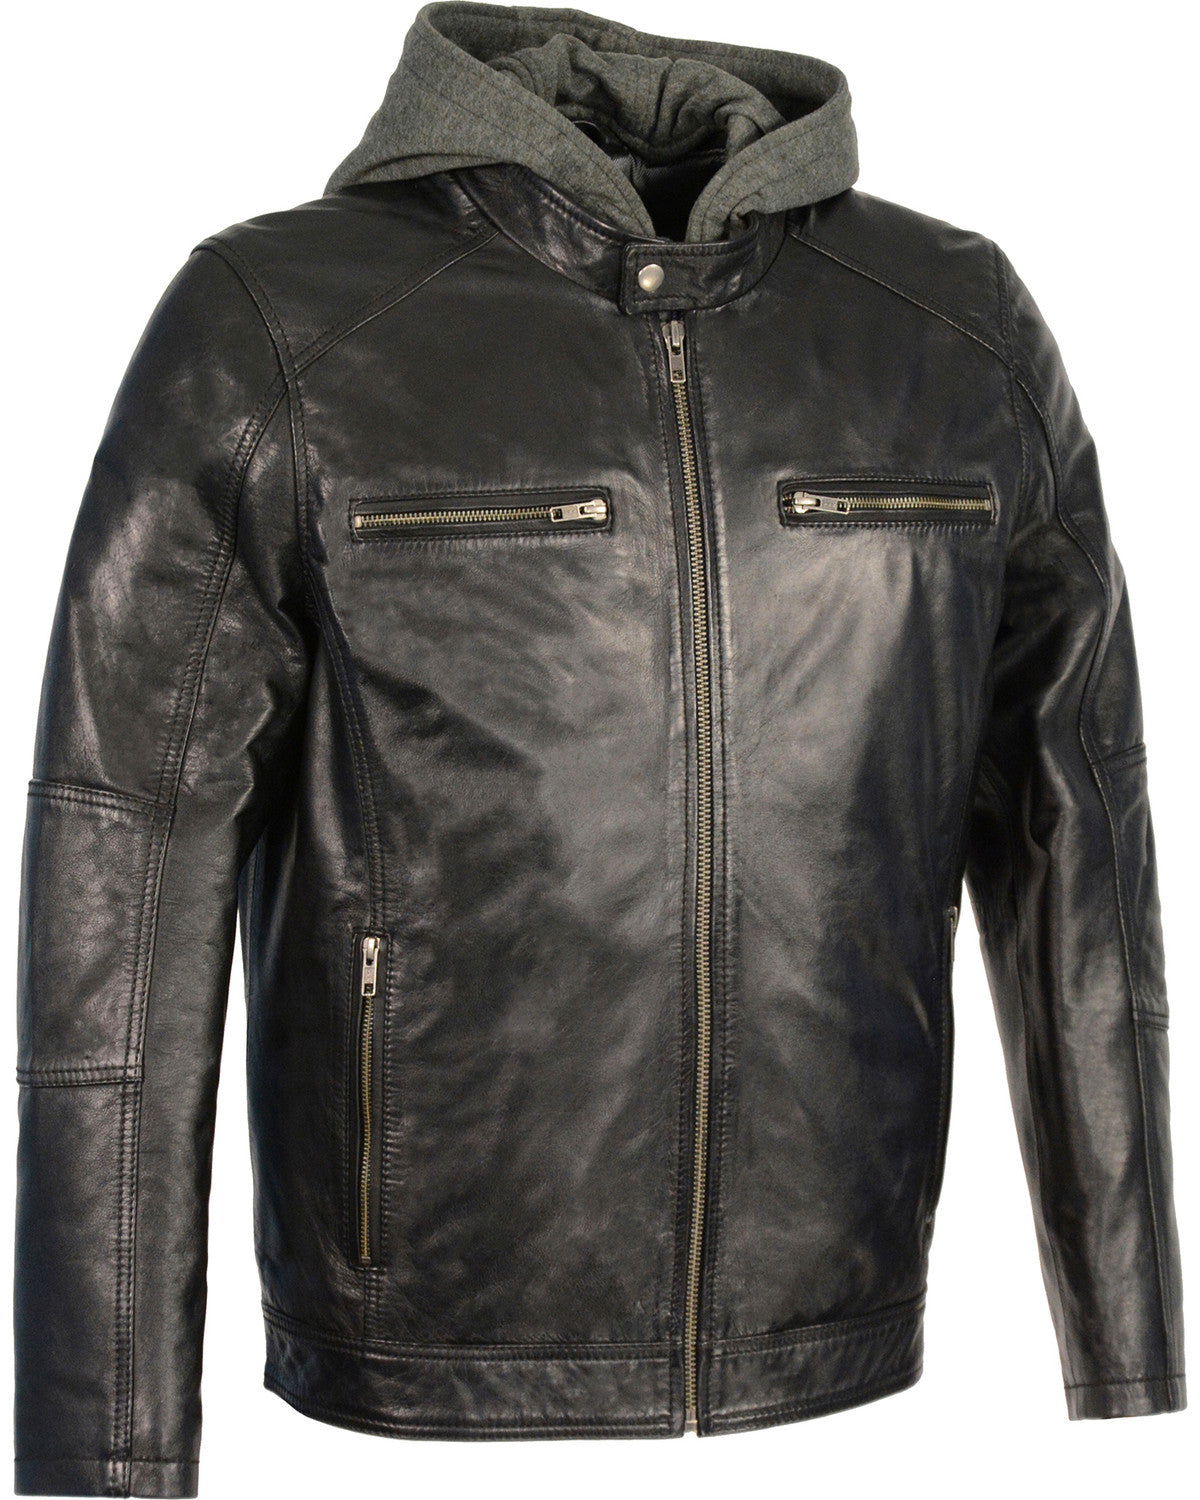 Black Motocycle Leather Biker Jacket Ionic Style for Men/Removable Hood